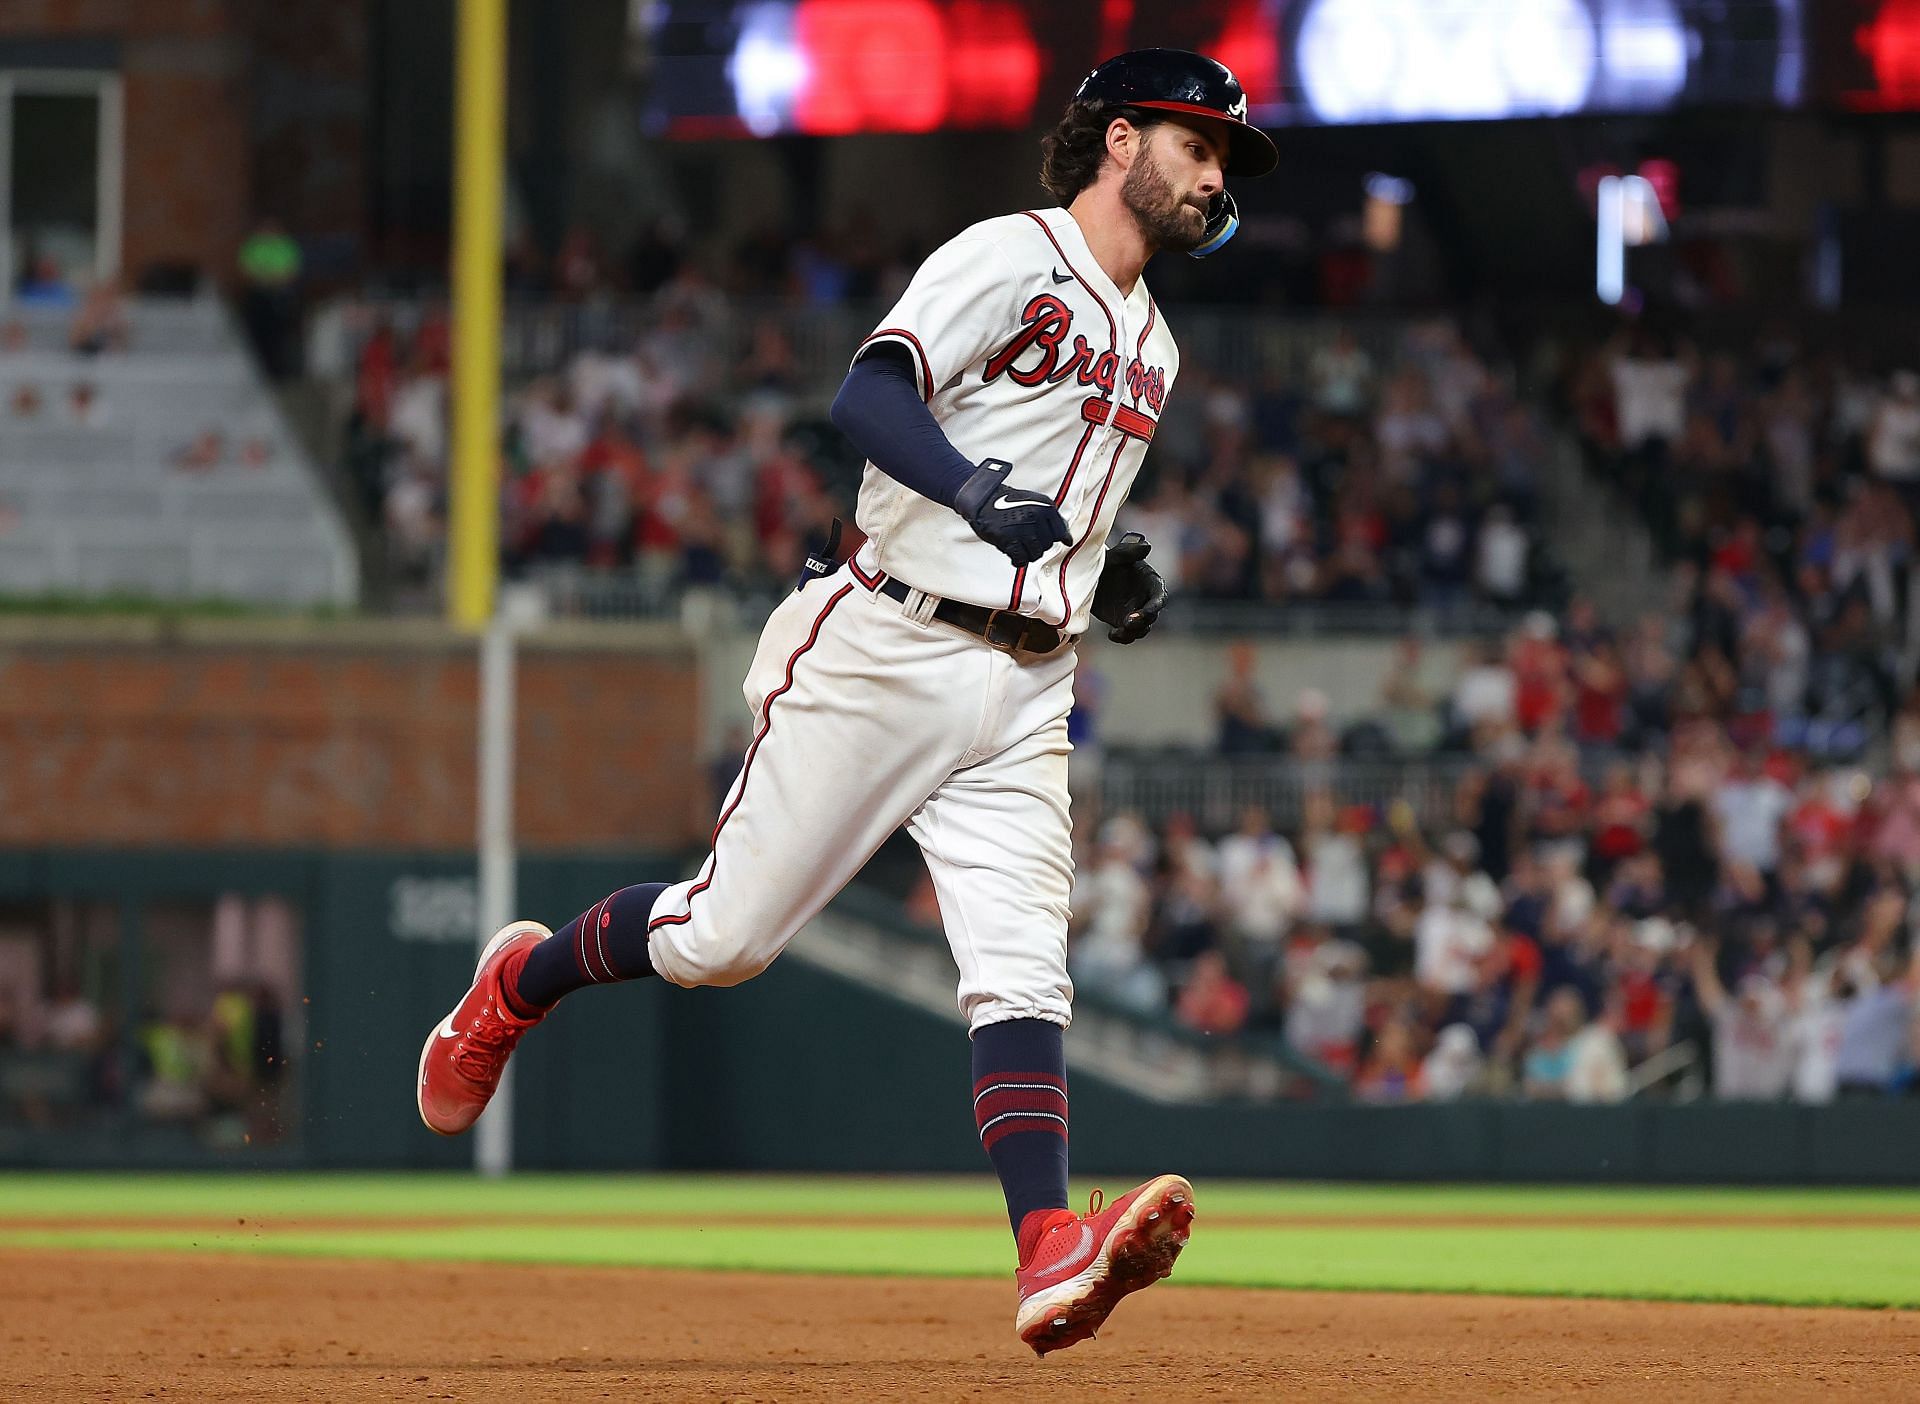 Braves shortstop rounding the bases after lead-off homer.